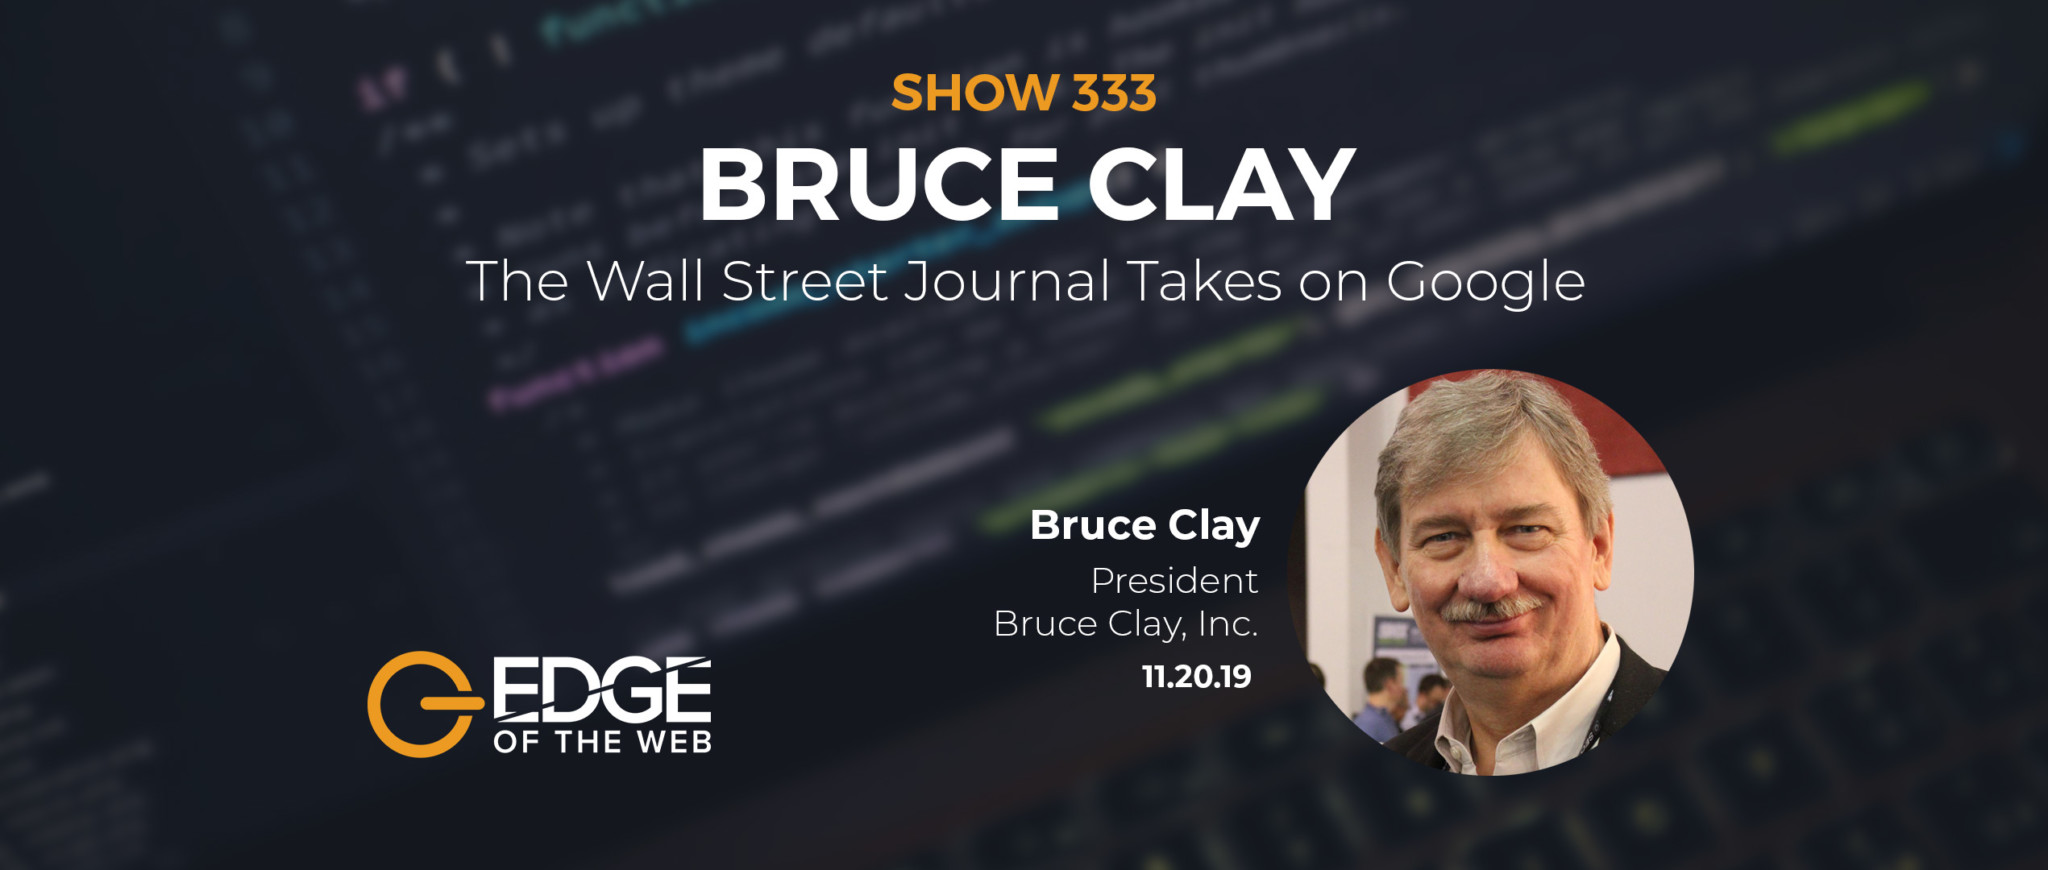 Show 333: The Wall Street Journal takes on Google, featuring Bruce Clay